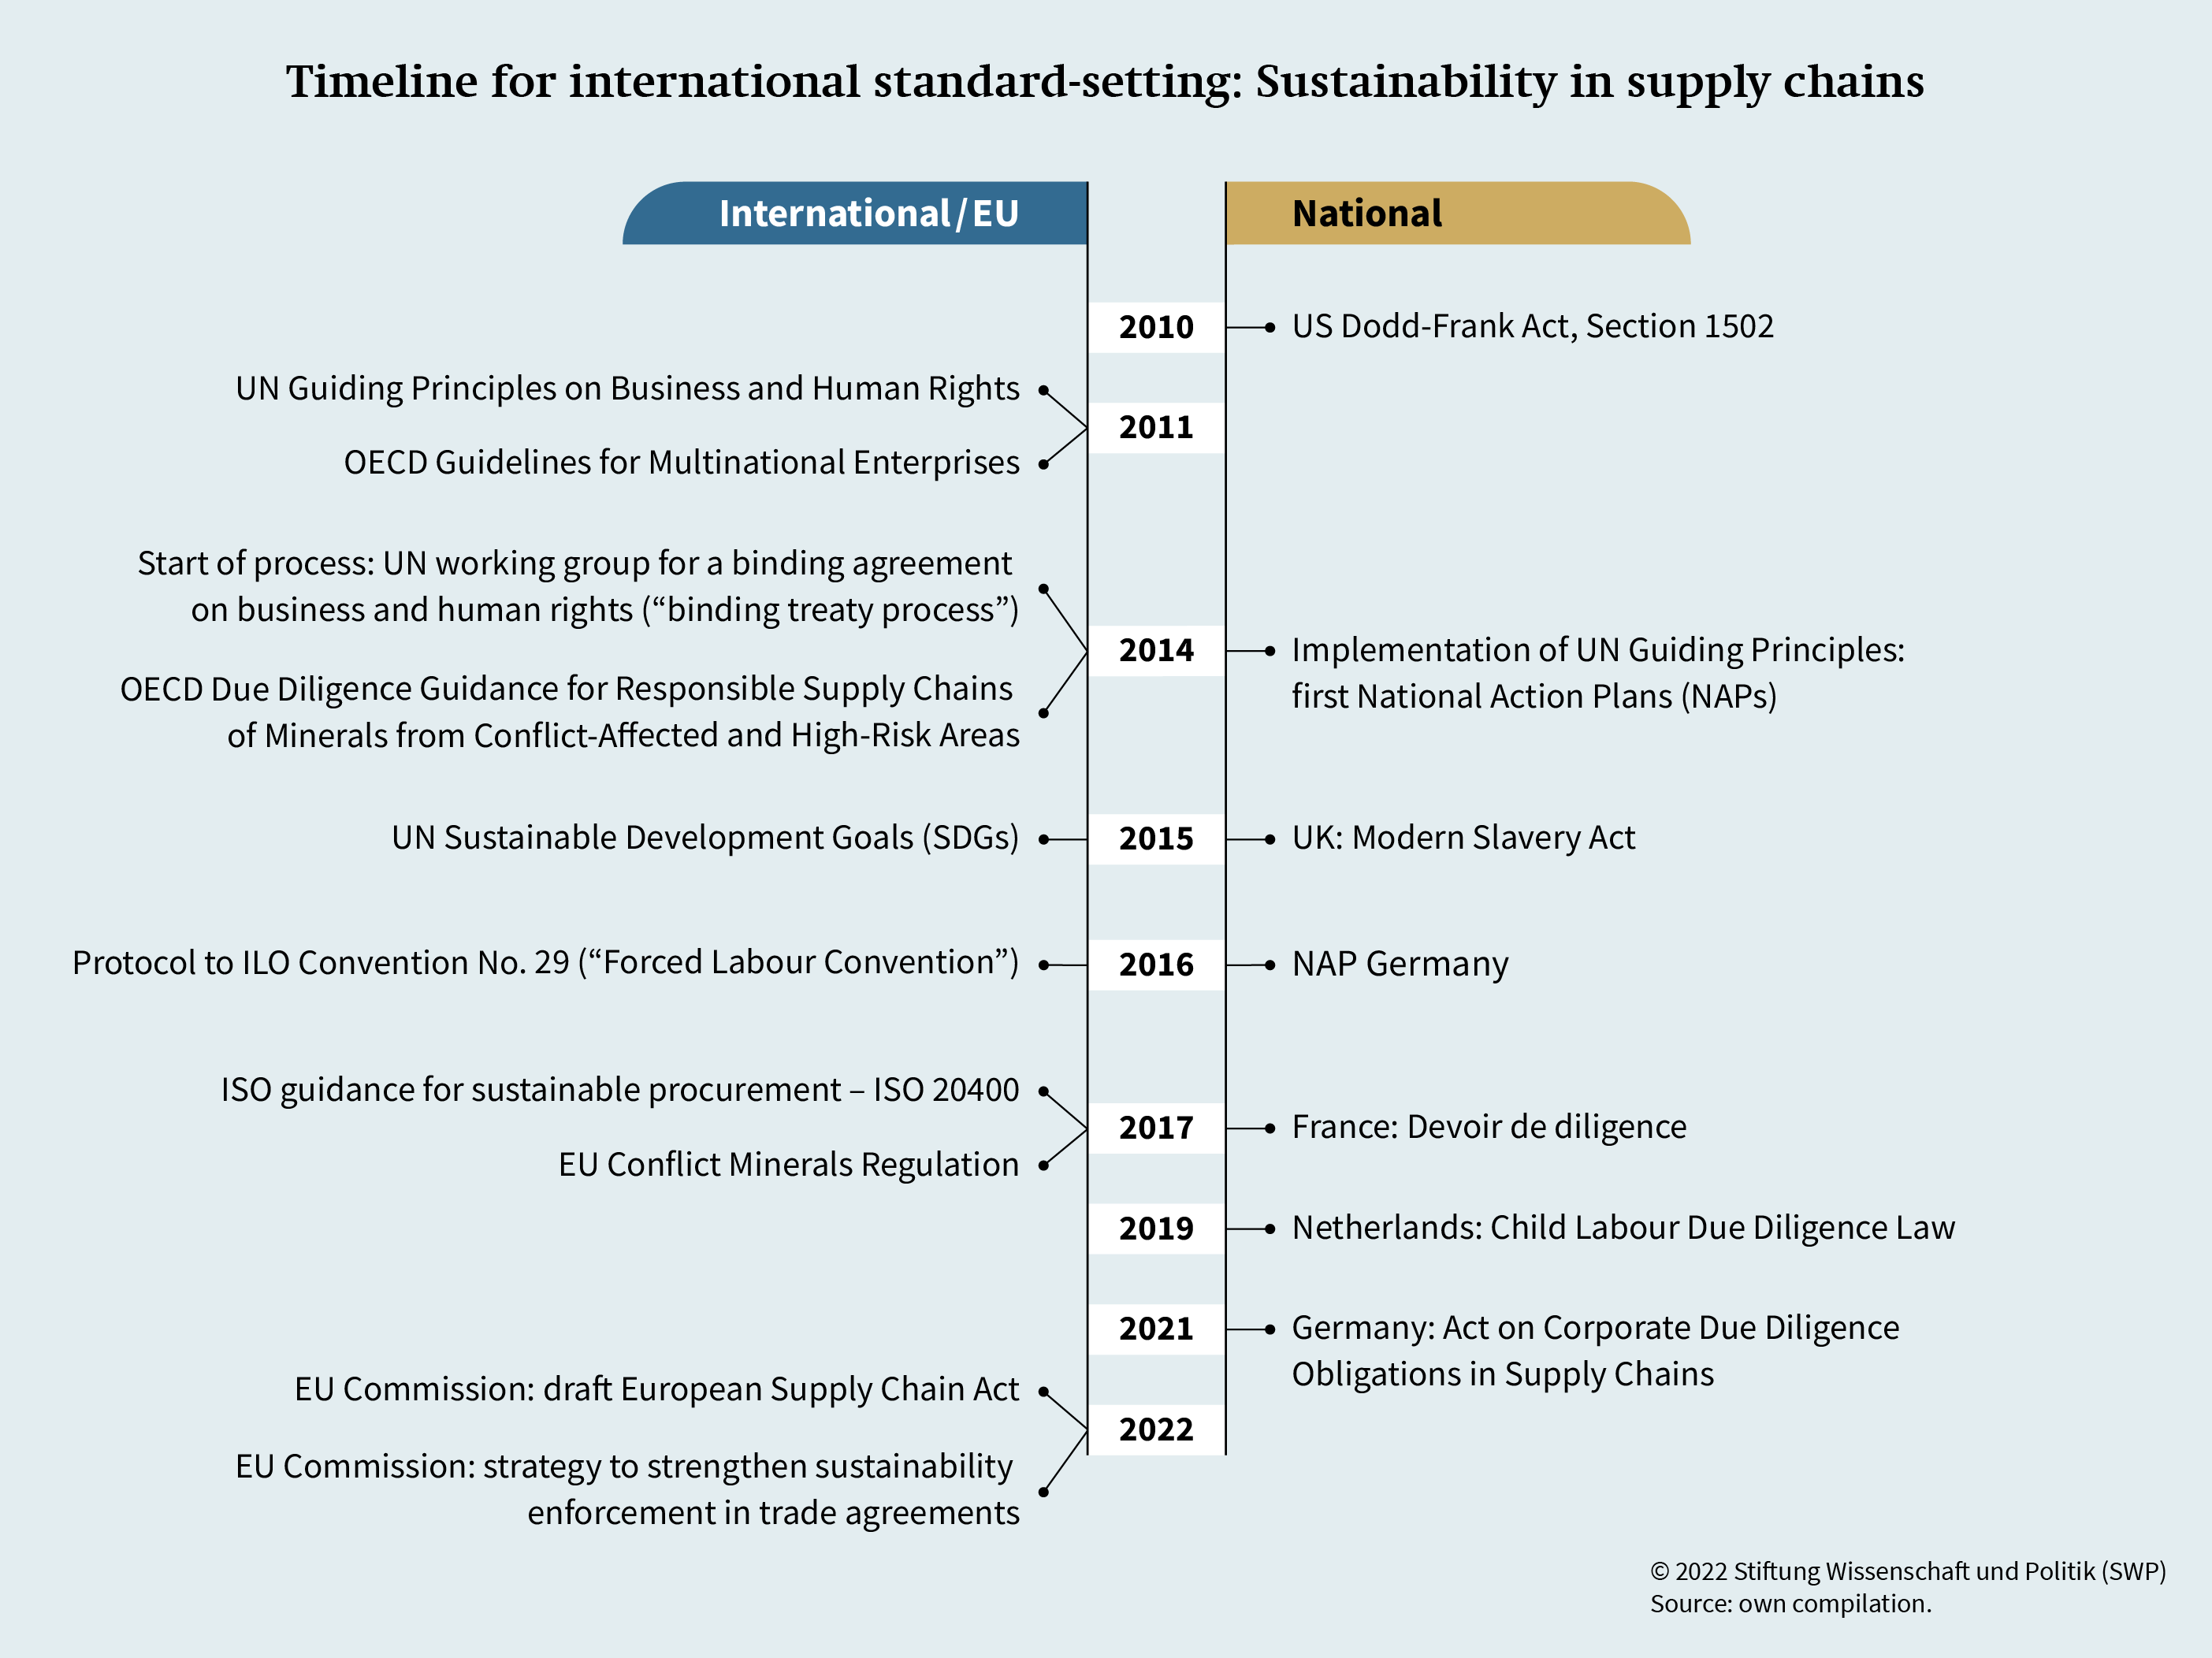 Timeline for international standard-setting: Sustainability in supply chains